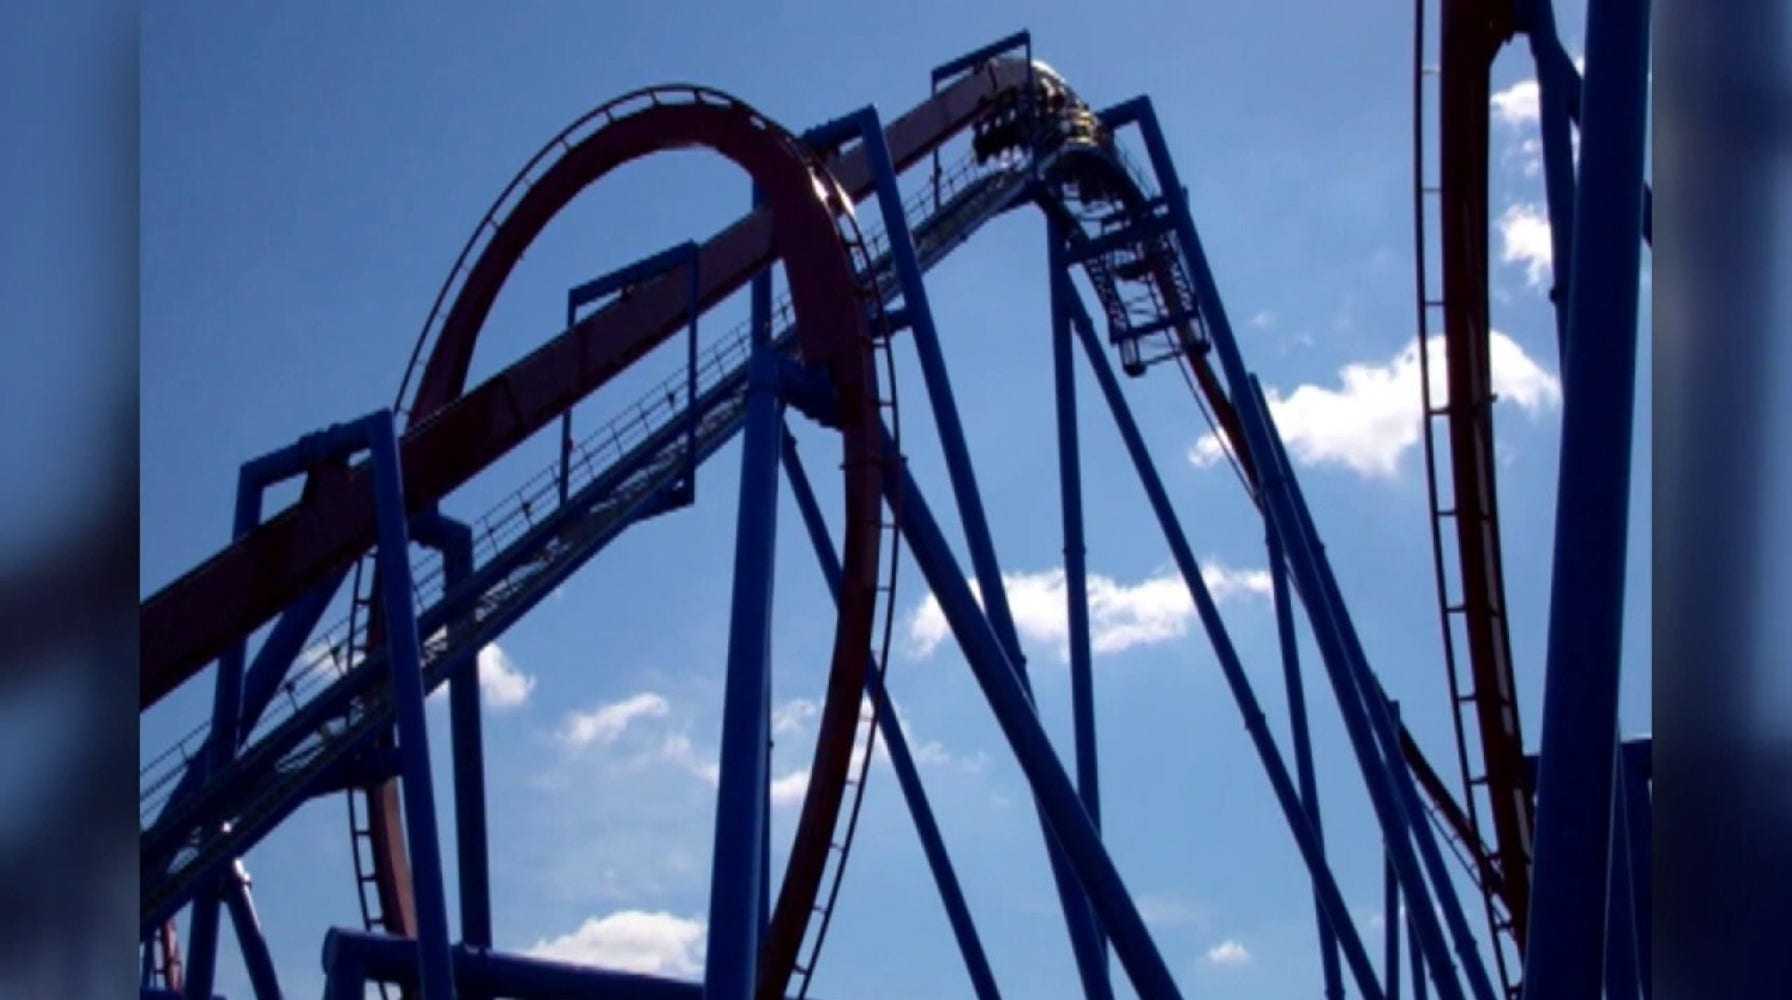 Tragic Loss: Amusement Park Guest Dies After Being Hit by Roller Coaster